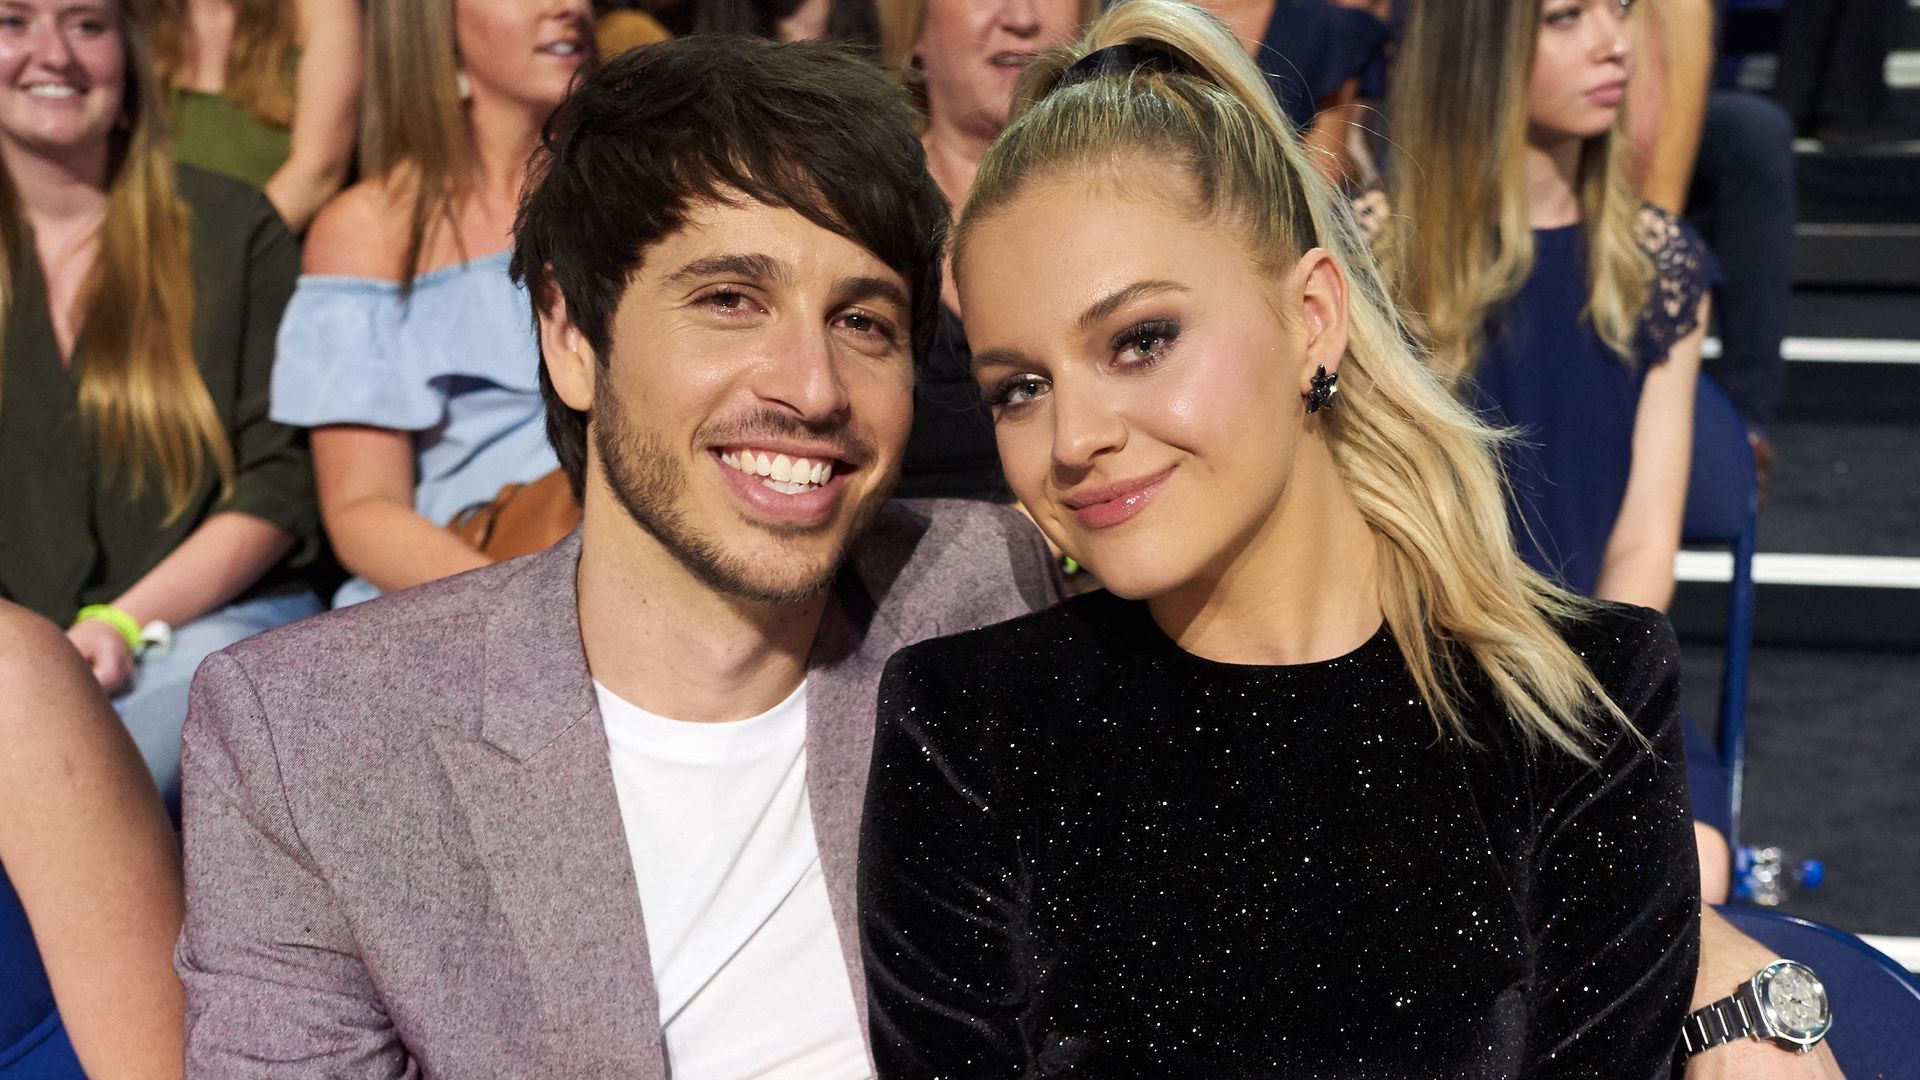 Kelsea Ballerini's thoughts on exhusband Evans in the wake of